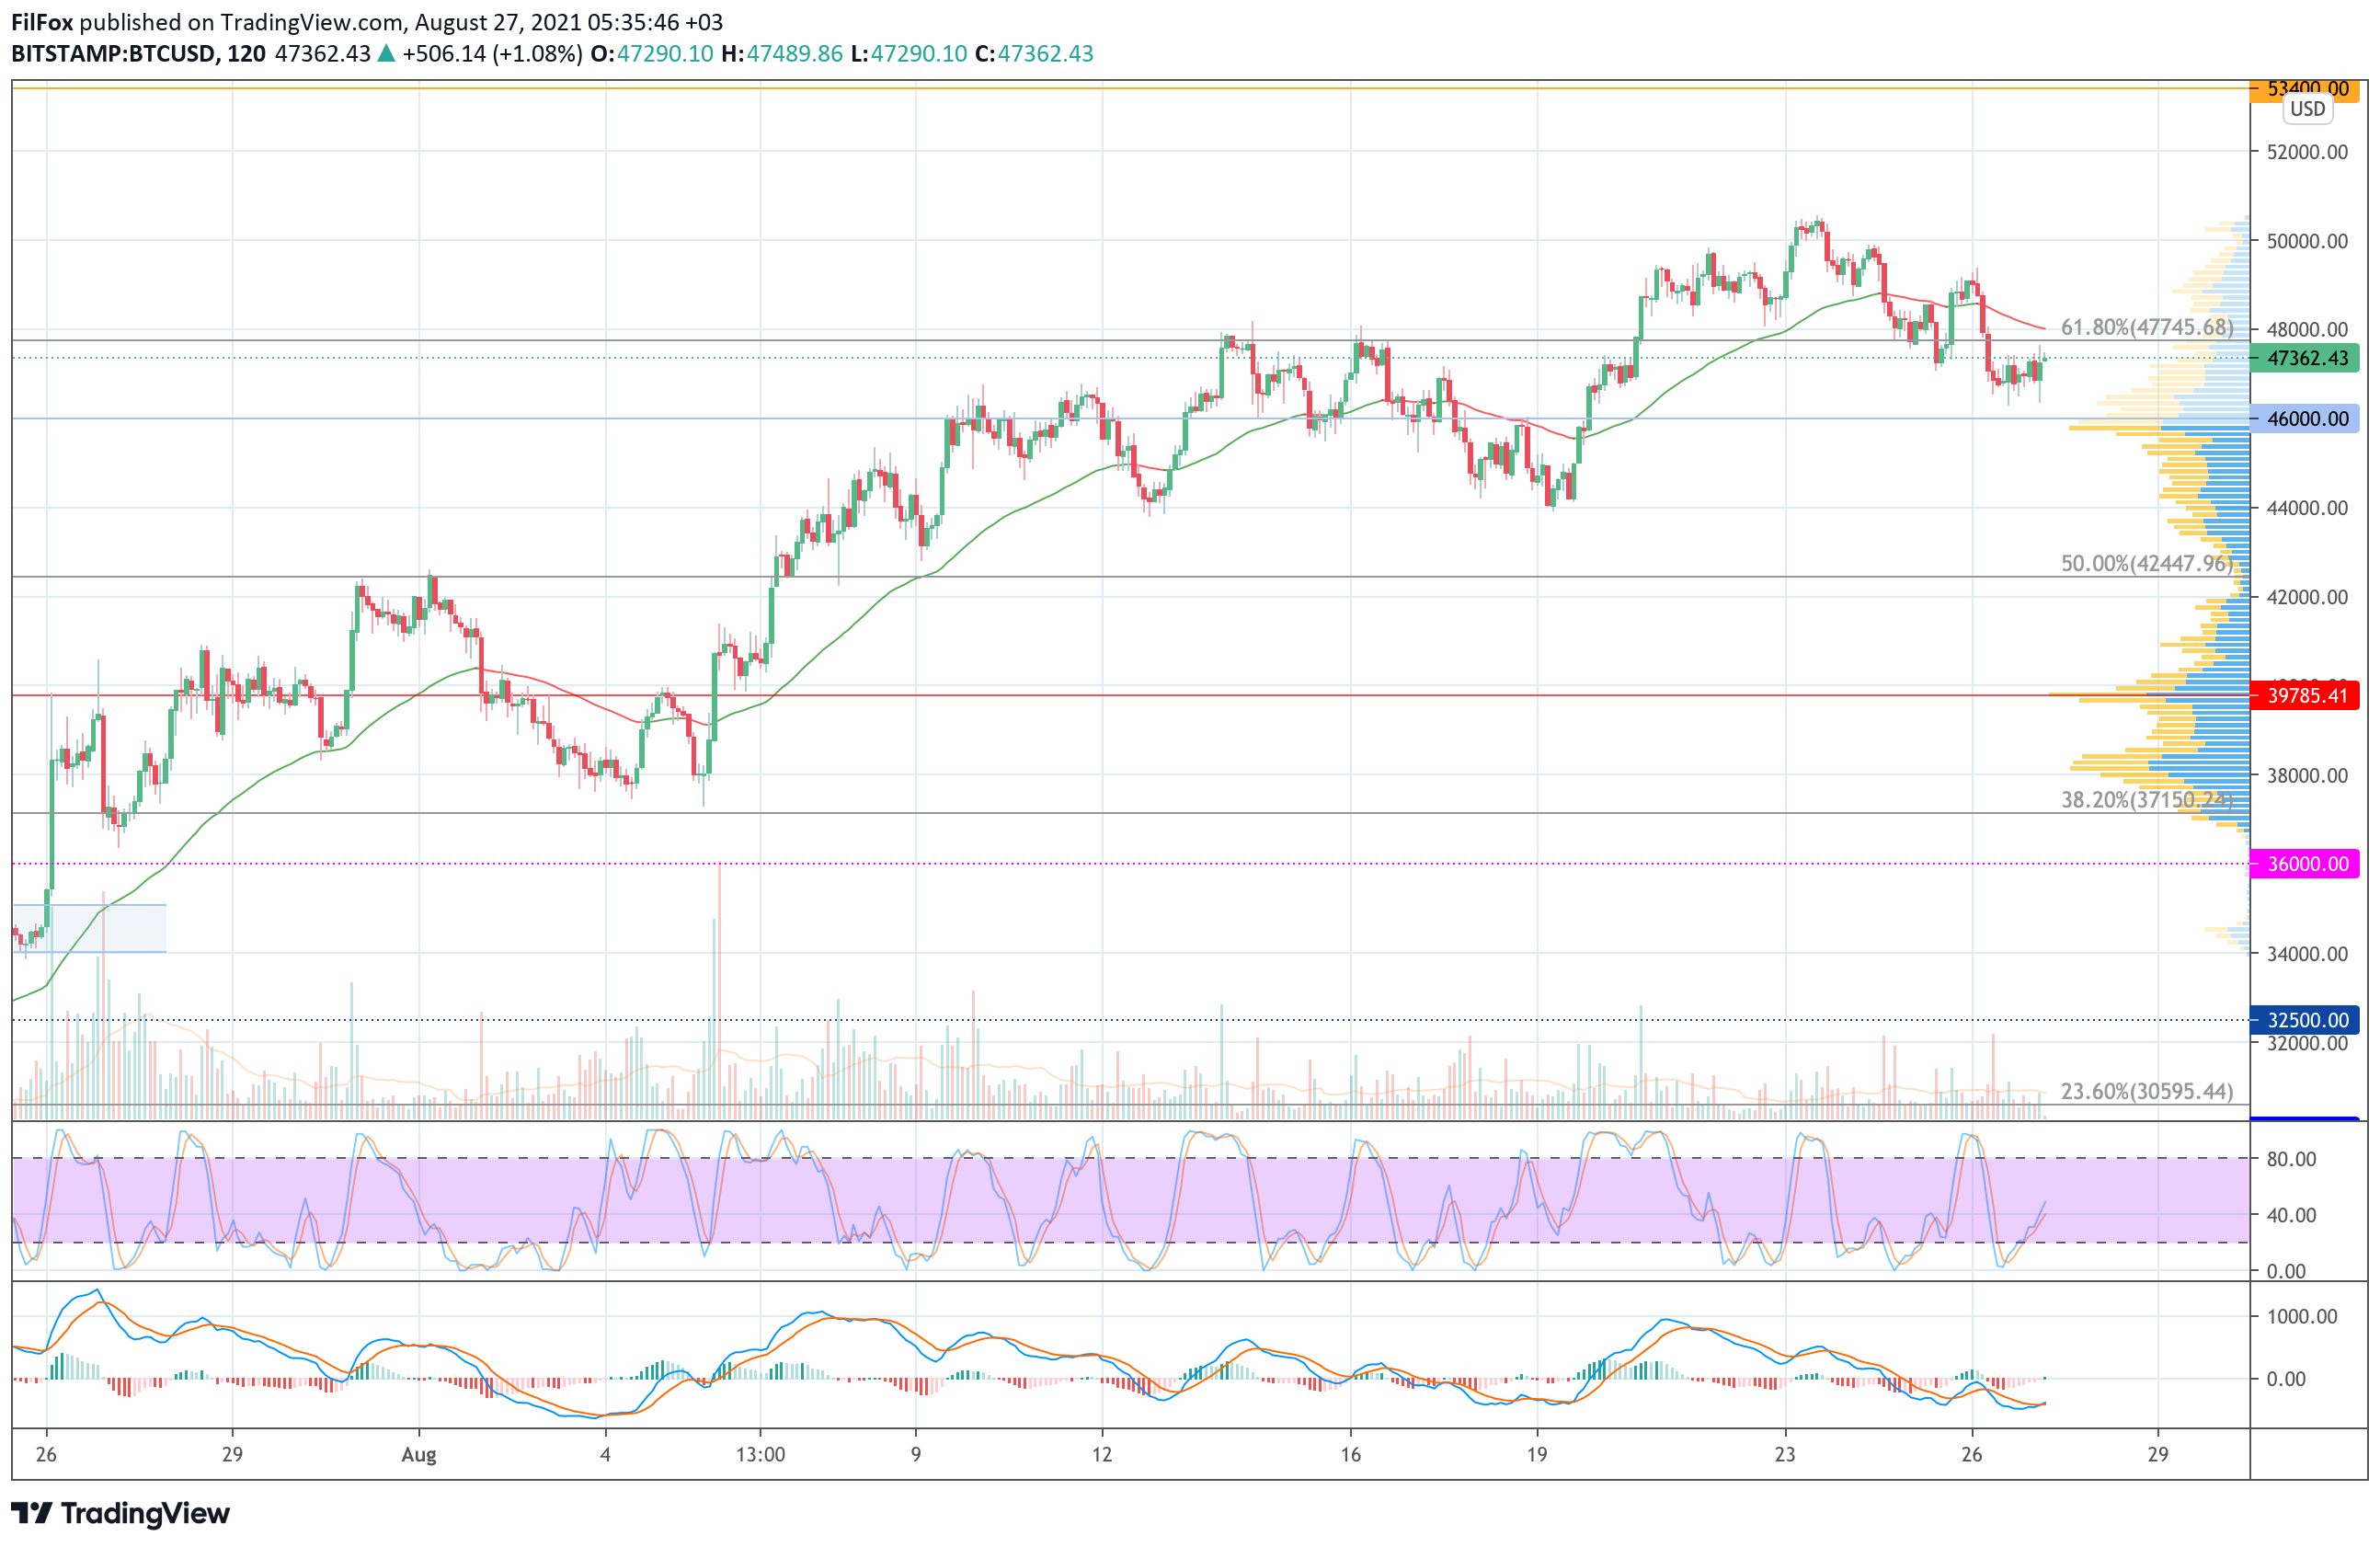 Analysis of the prices of Bitcoin, Ethereum, XRP for 08/27/2021